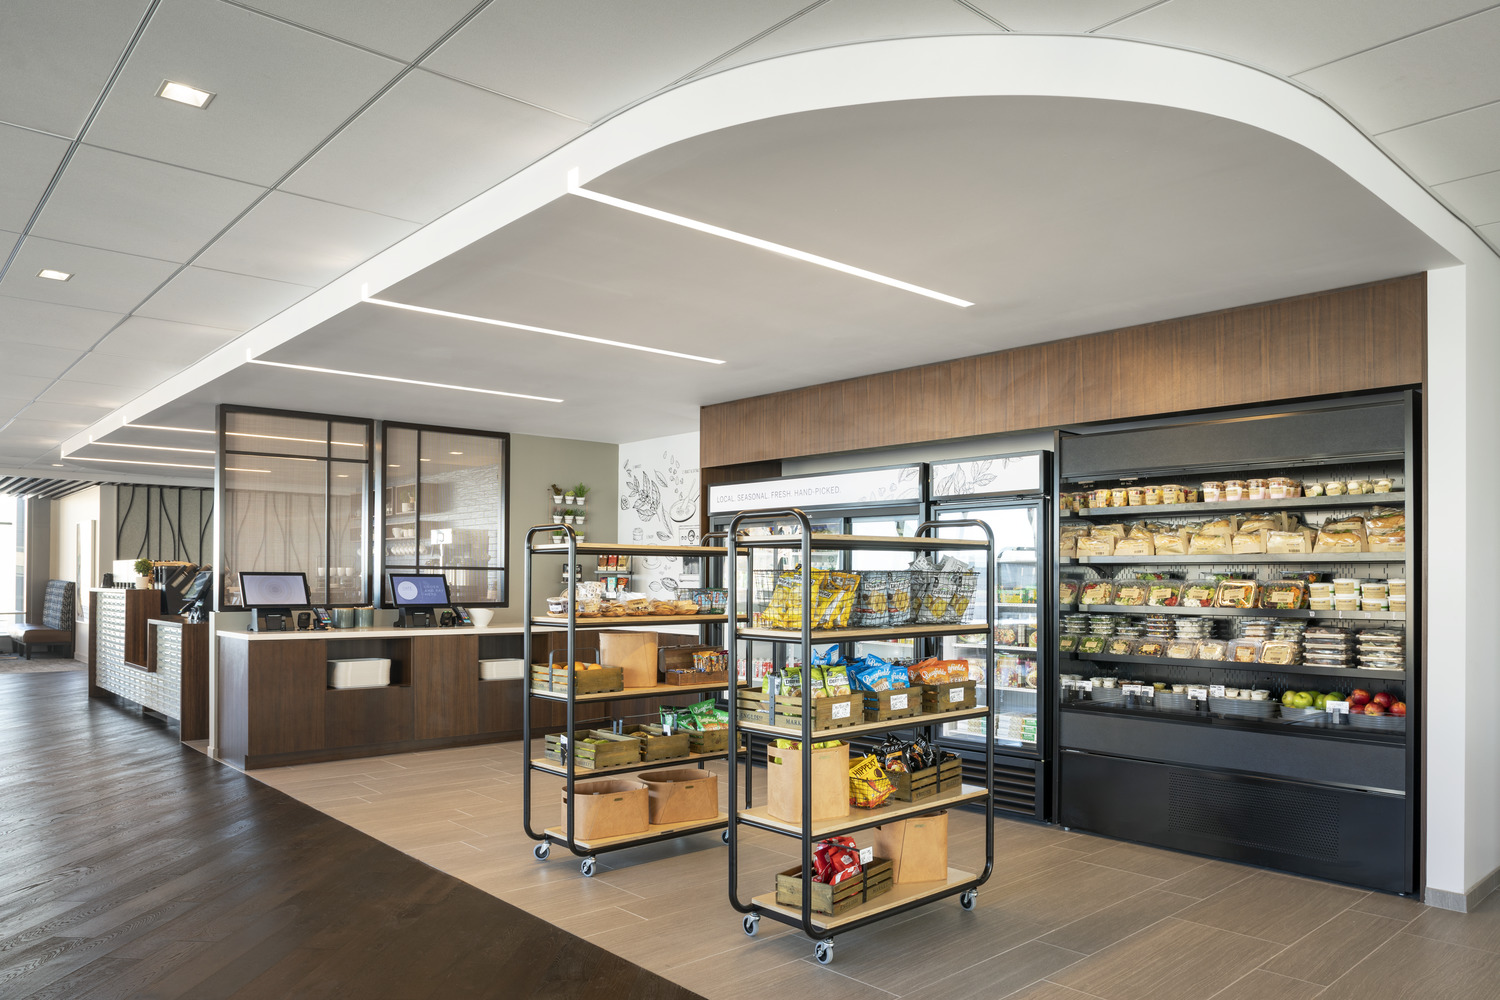 Global investment management company cafeteria store